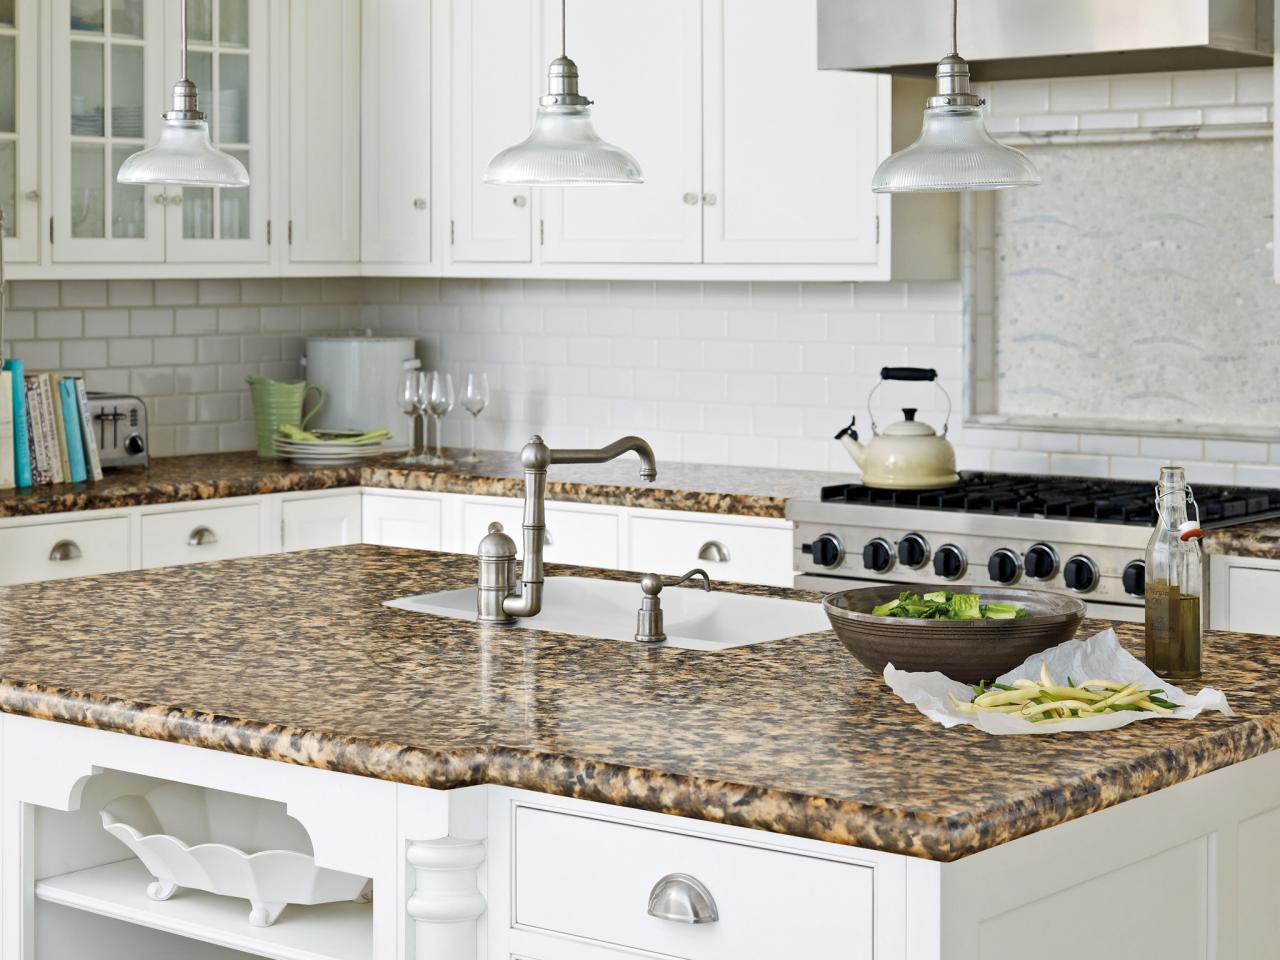 Laminate Kitchen Countertops Pictures Ideas From Hgtv Hgtv